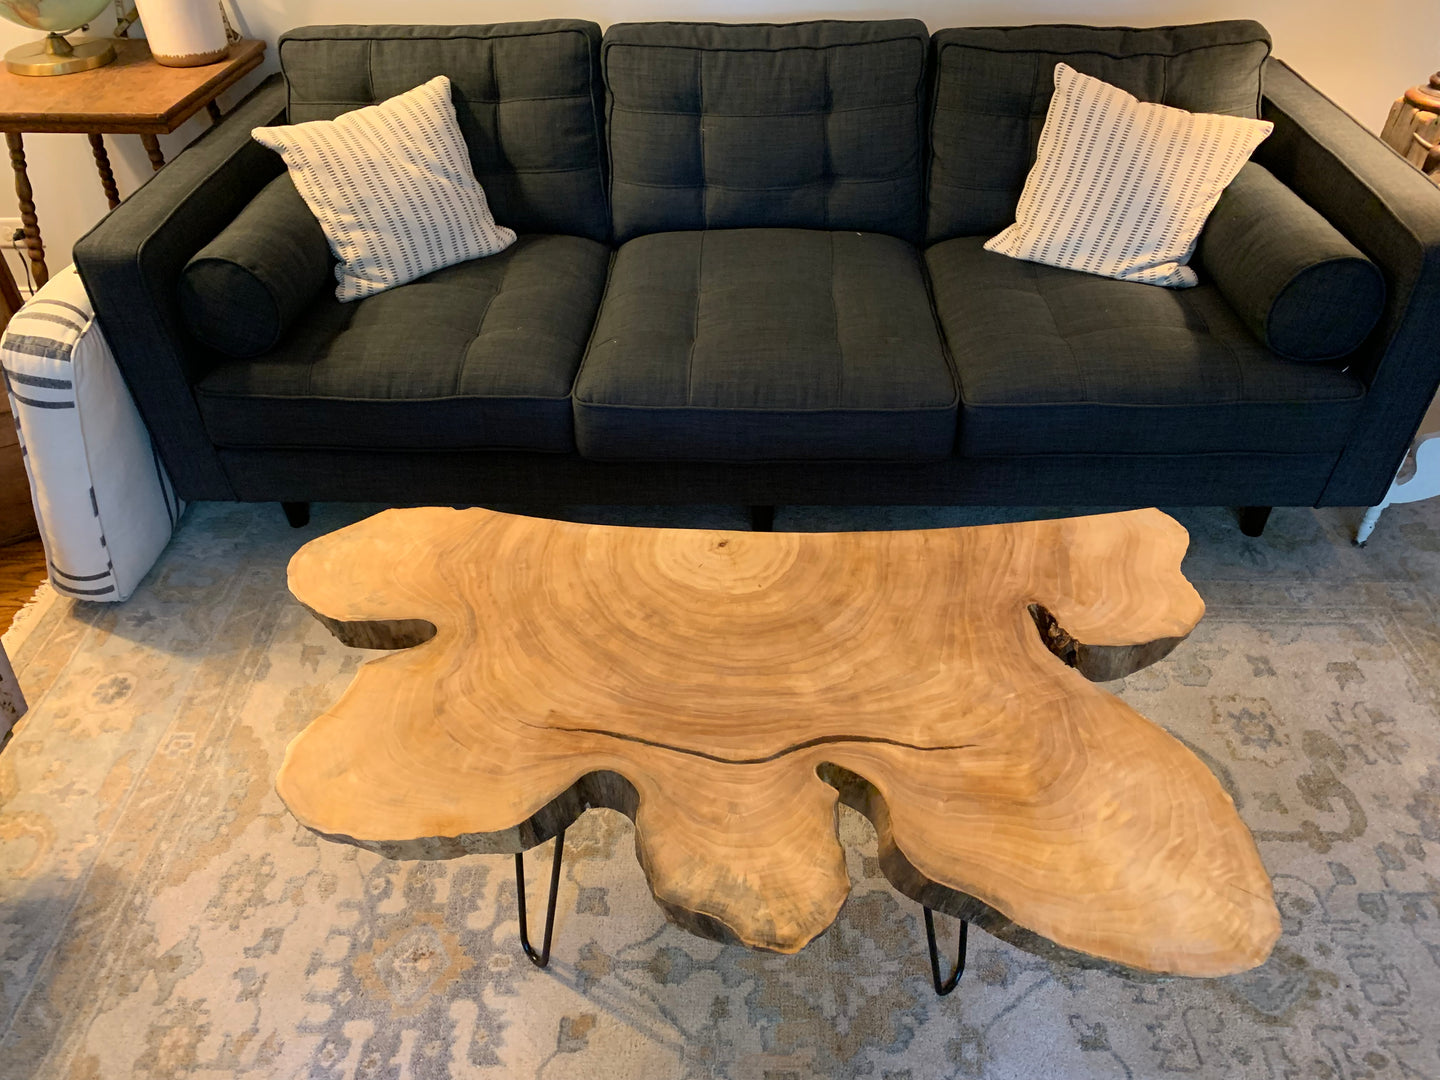 Slabbed Coffee Table with Hair Pin Legs